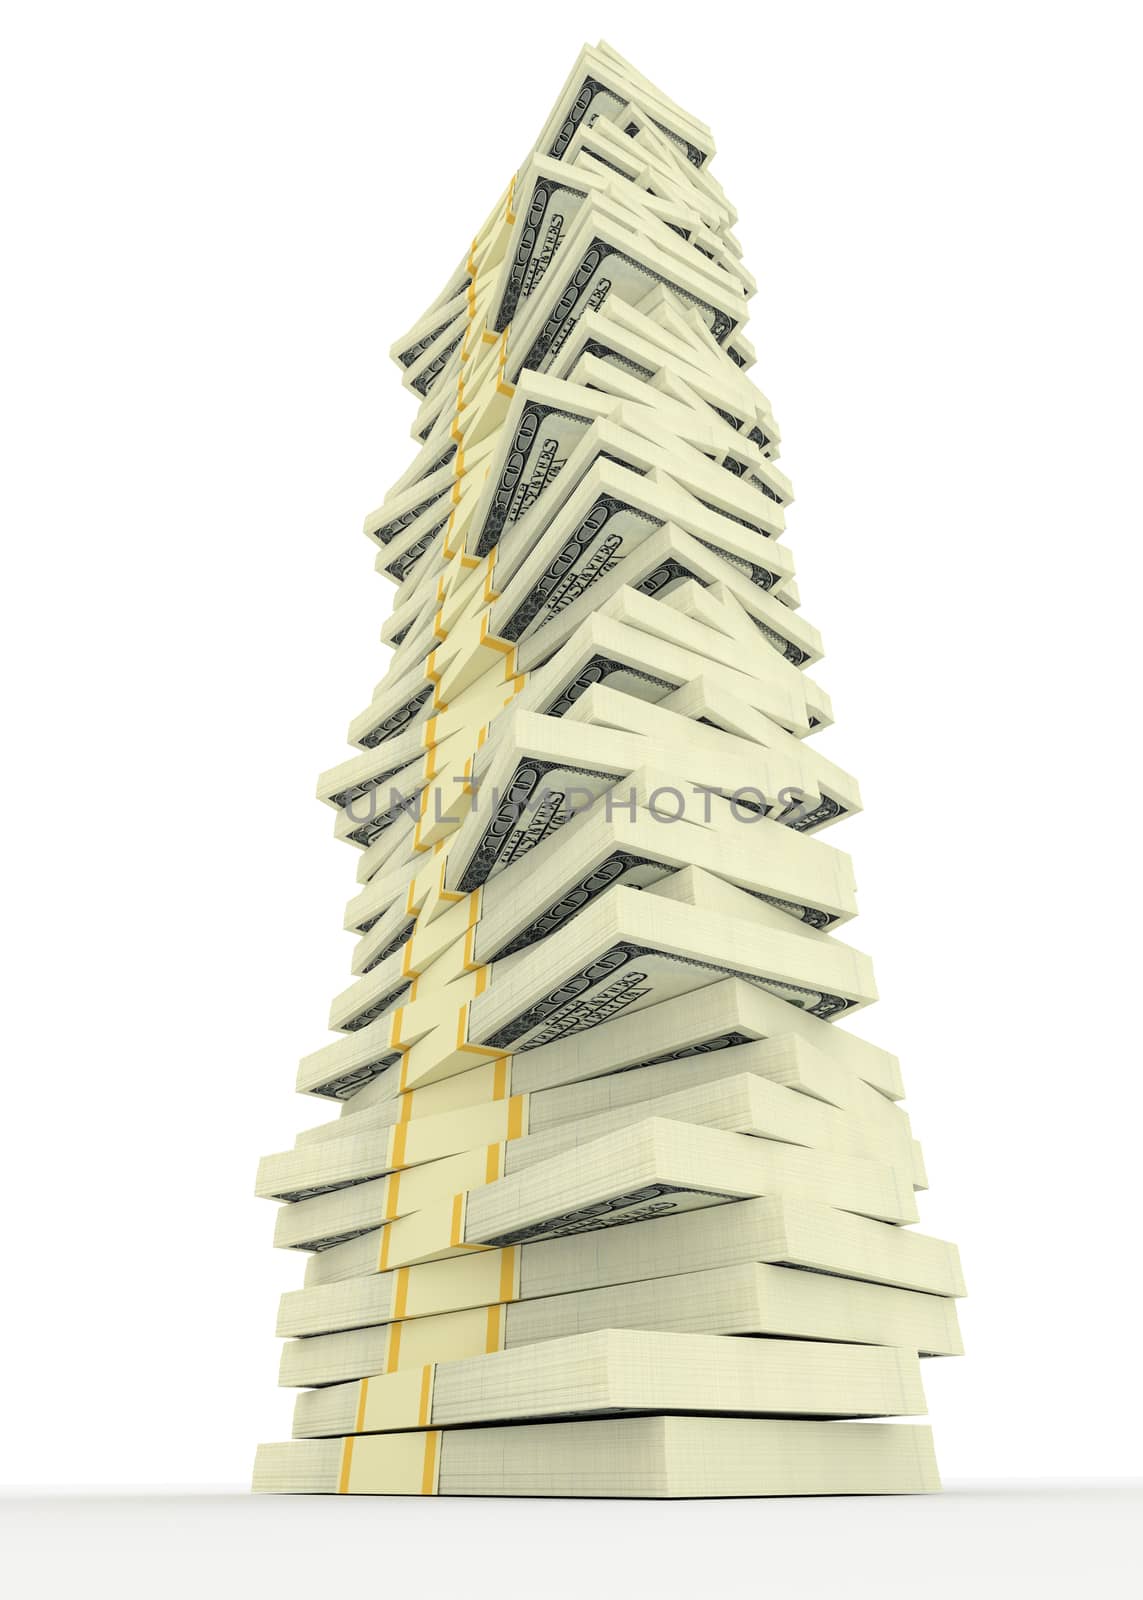 Illustration of big money stack from dollars usa. Finance concepts